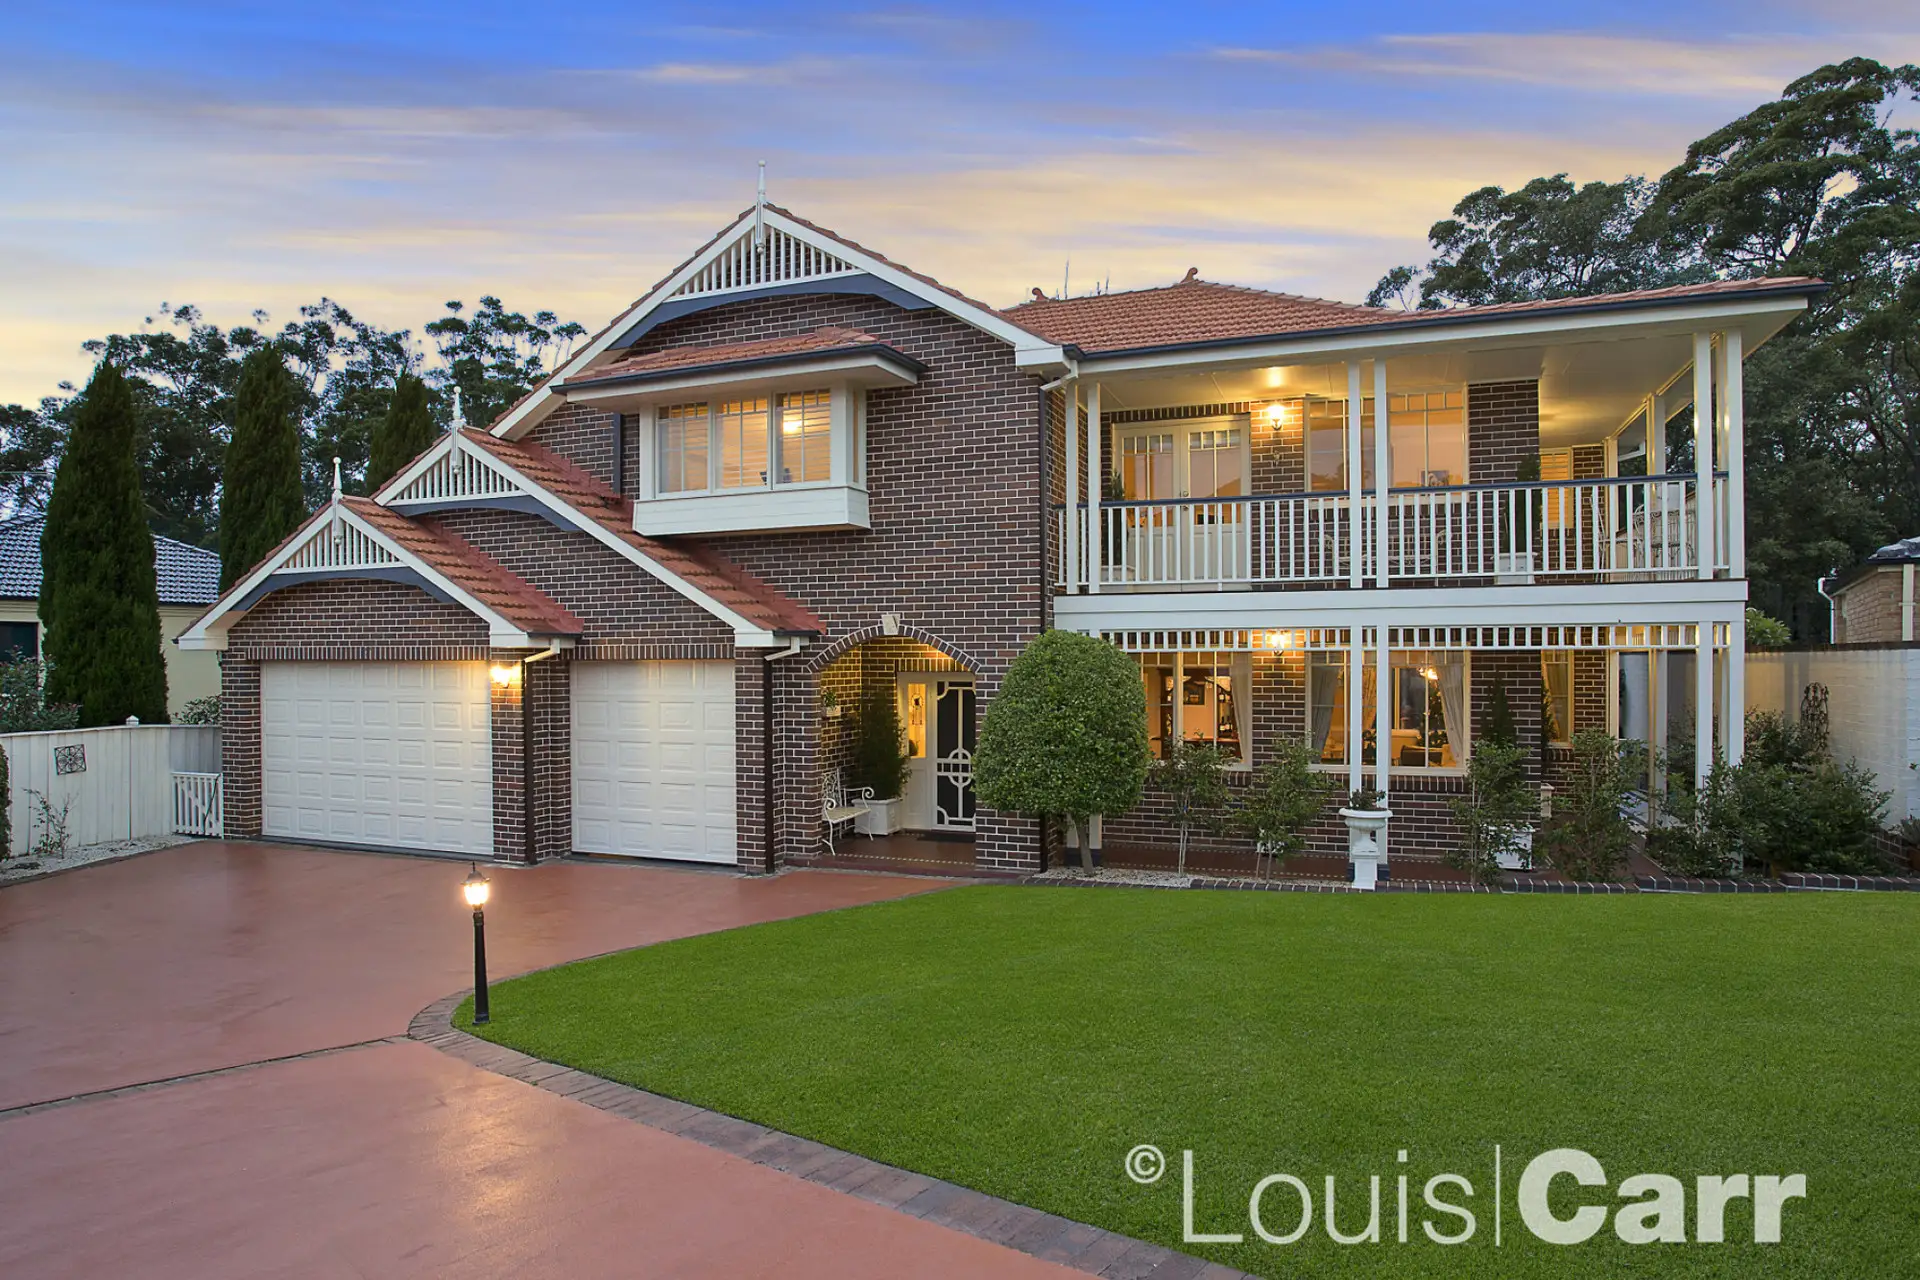 Photo #1: 17 George Muir Close, Baulkham Hills - Sold by Louis Carr Real Estate